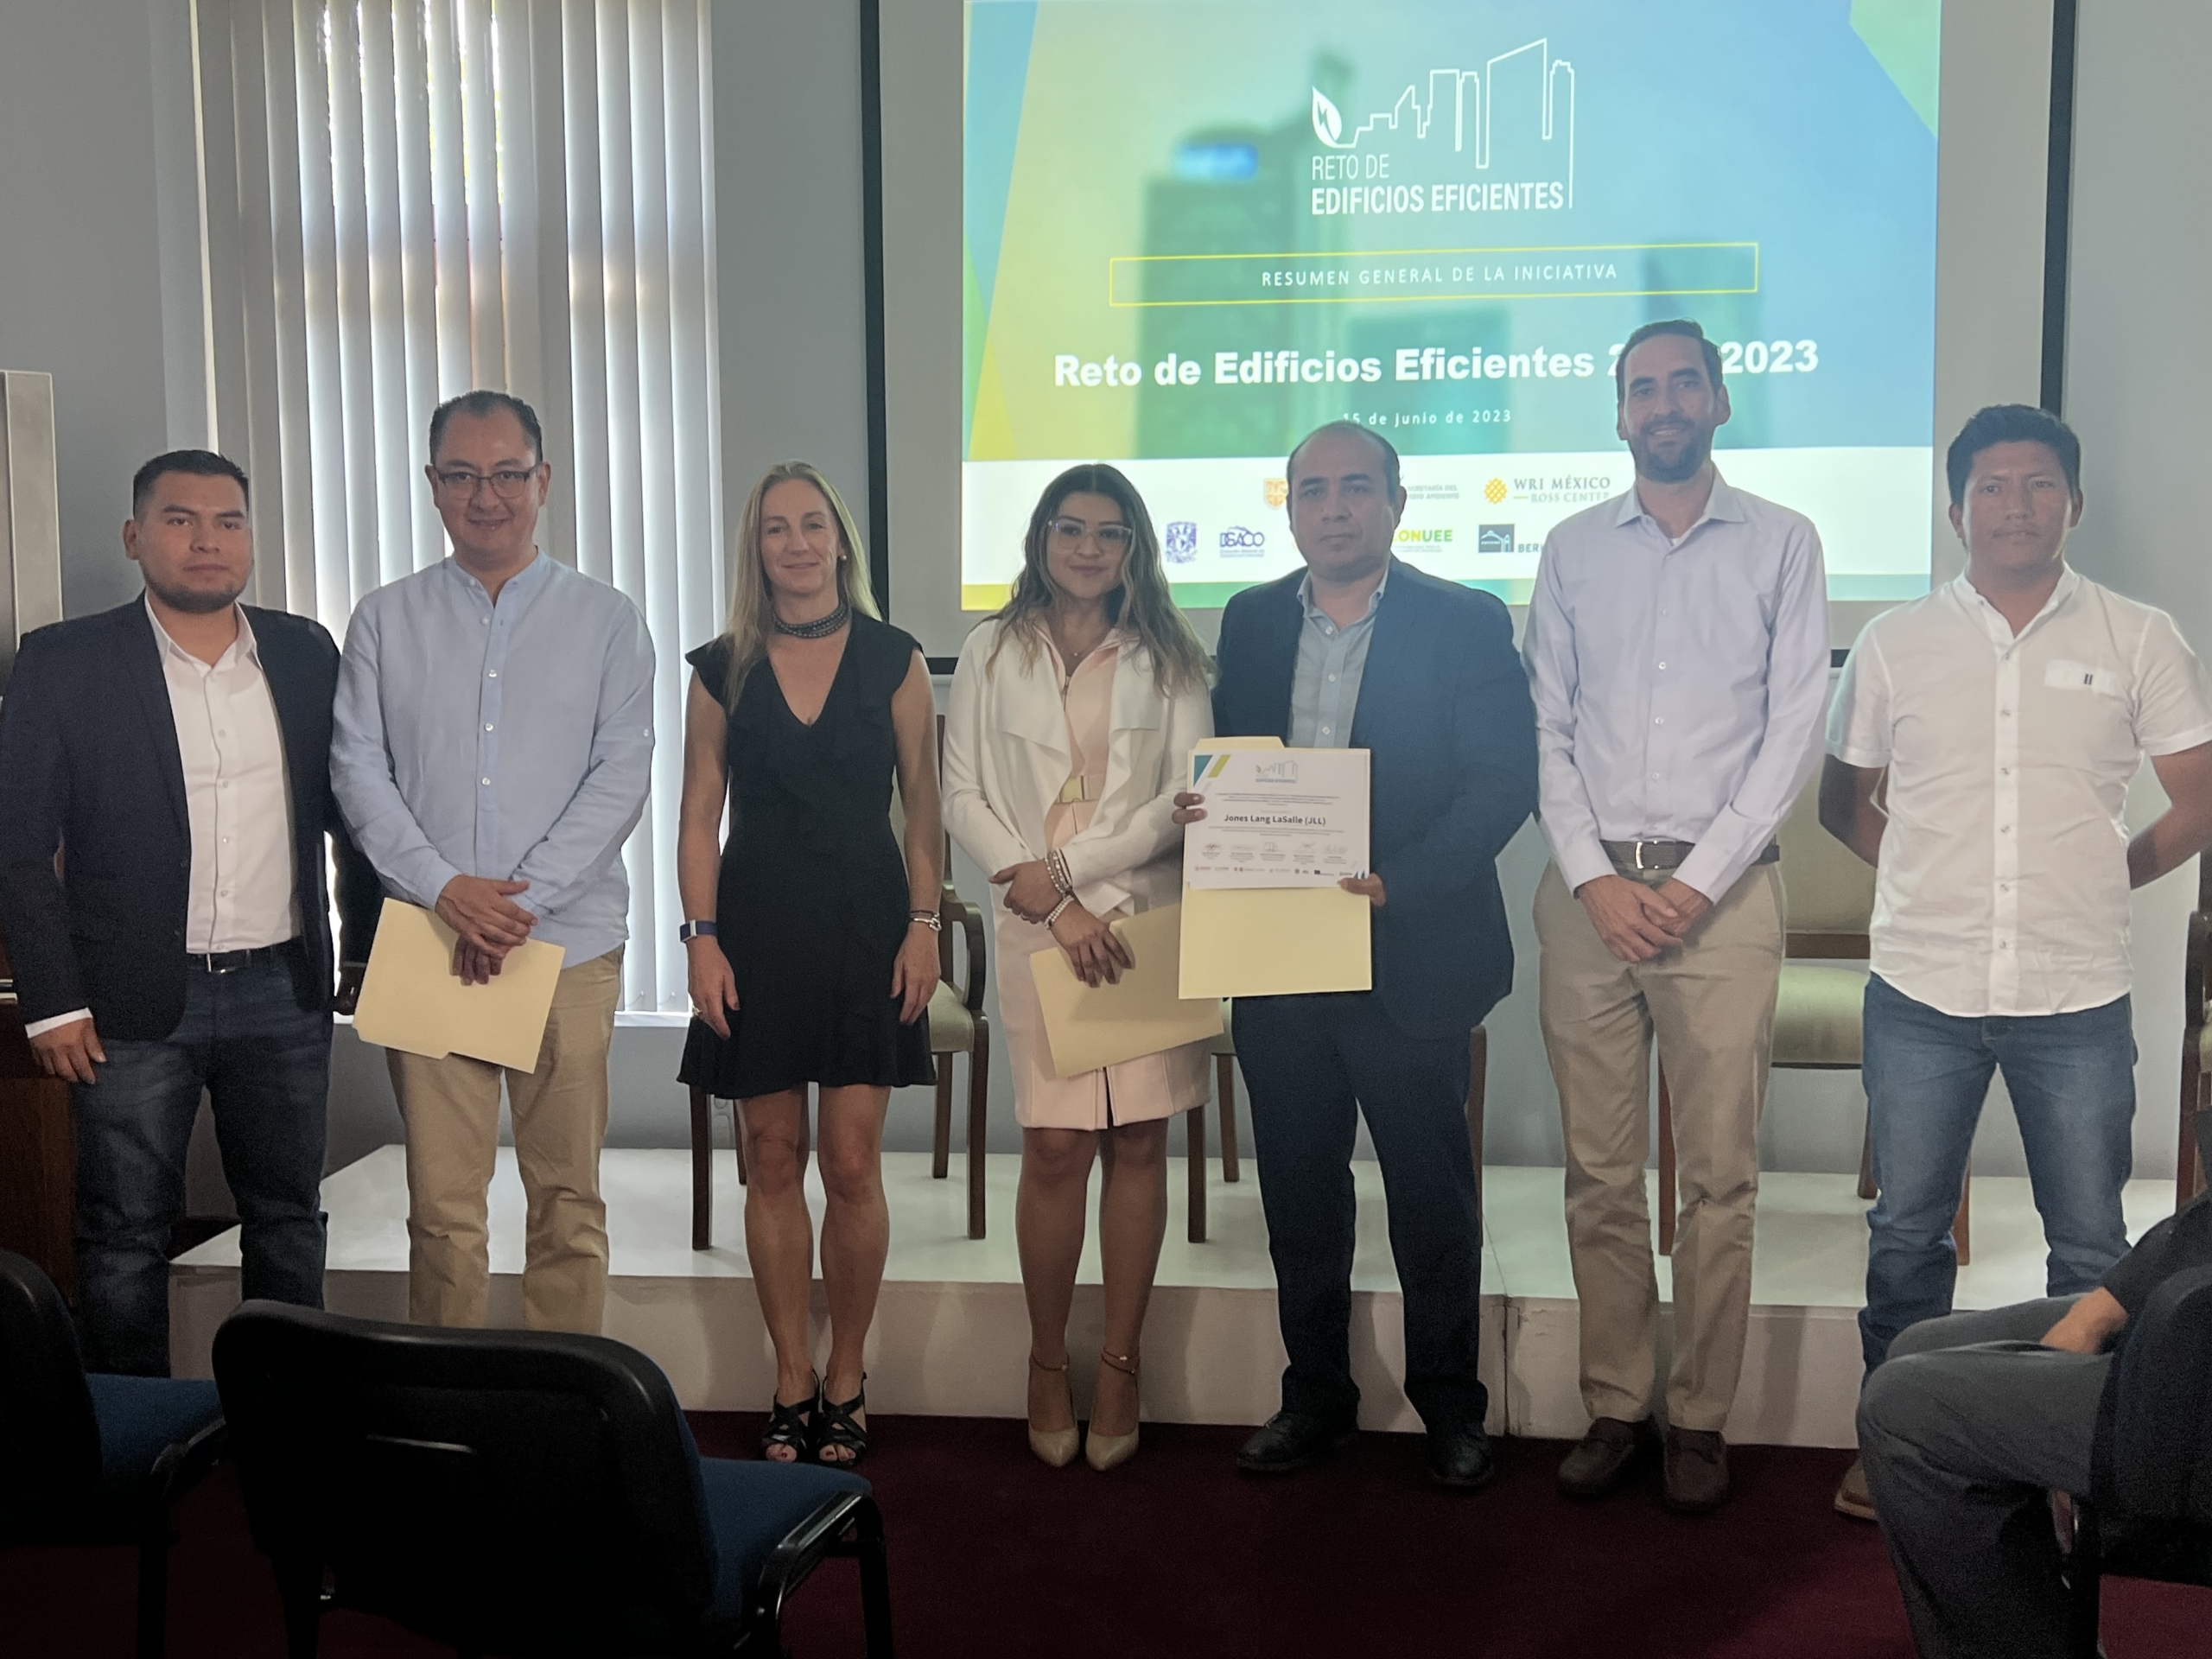 Efficient Building Challenge in Mexico City supported by USAID/Mexico and LBNL achieves energy savings and emission reductions